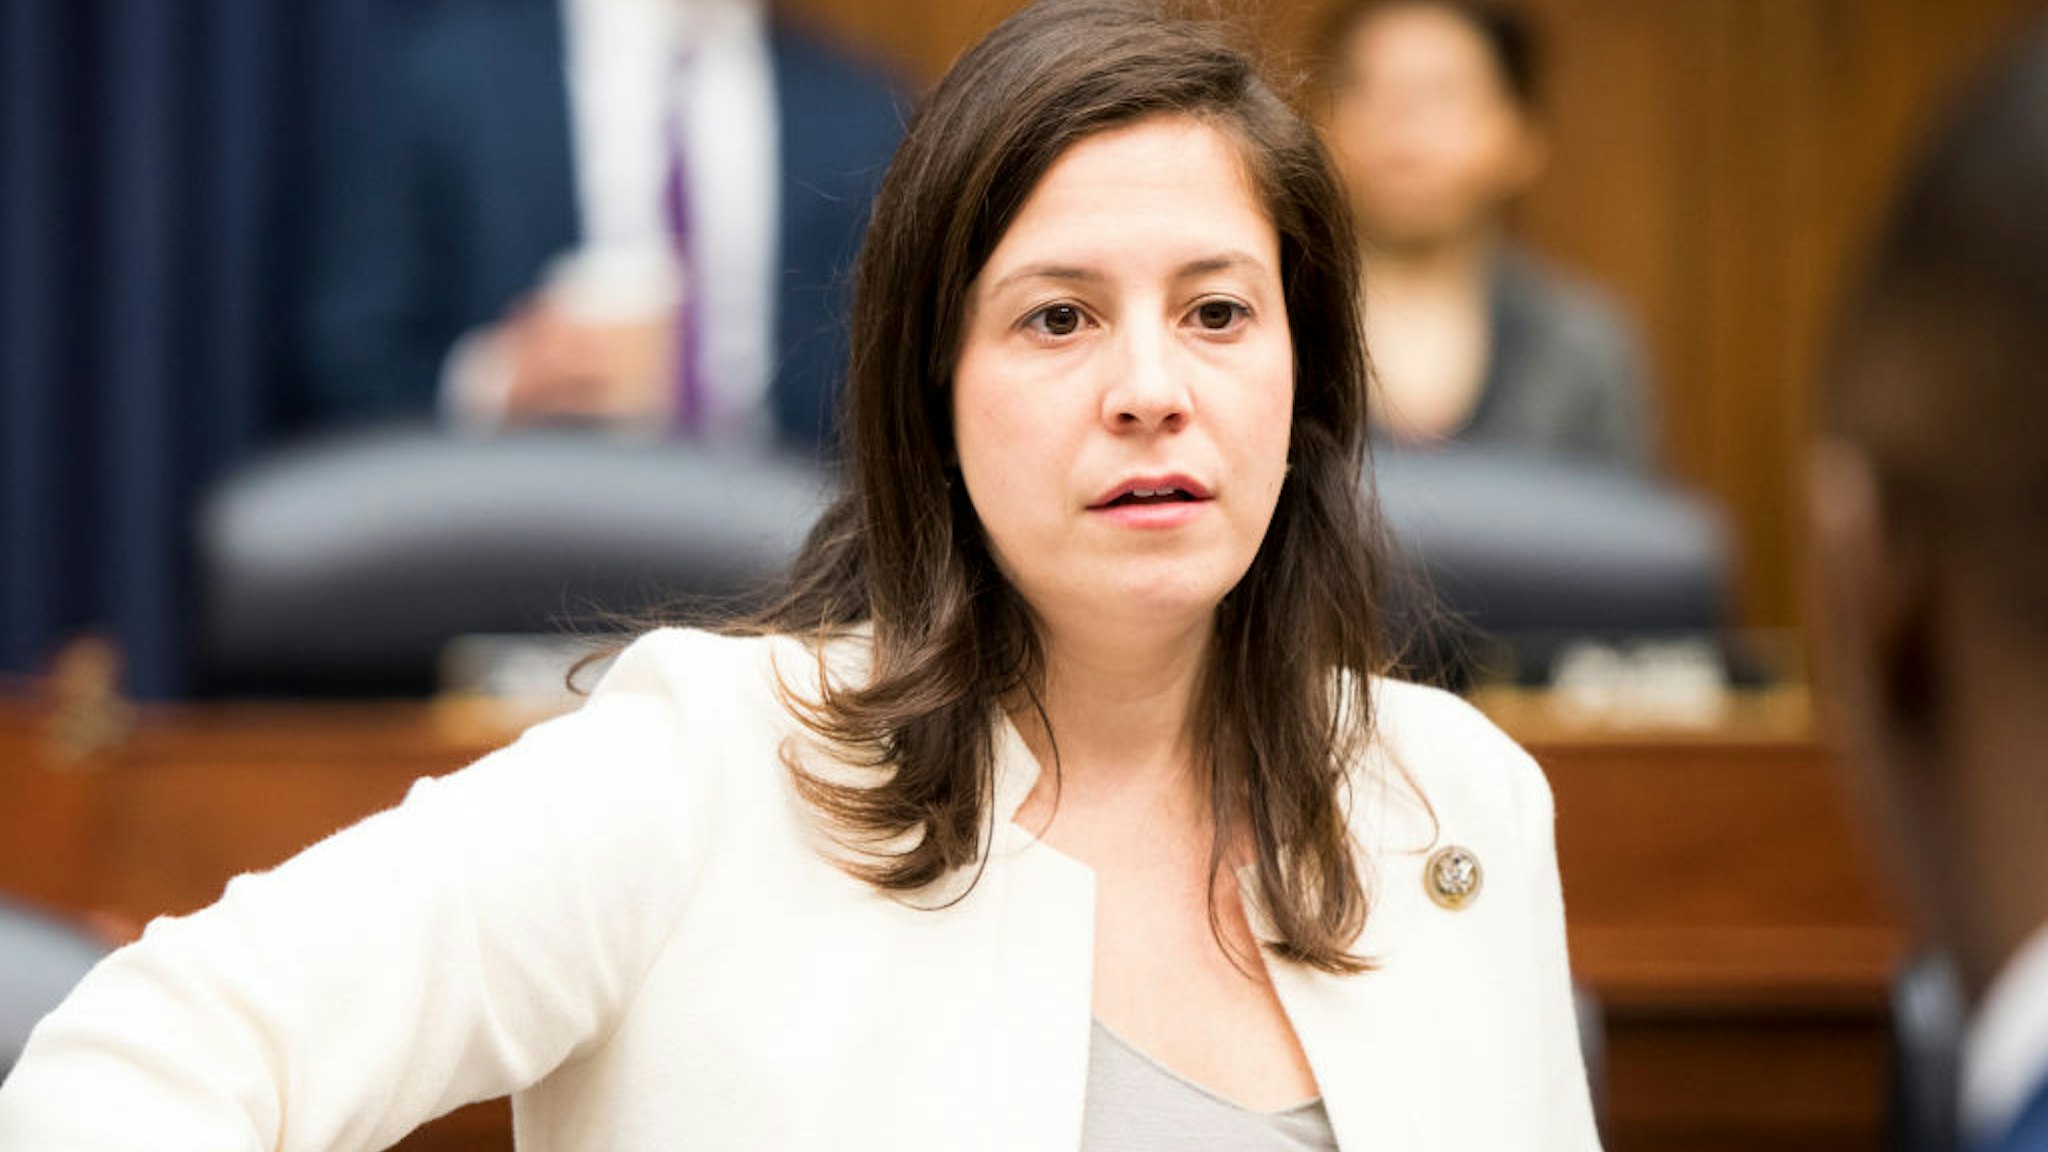 Elise Stefanik takes her seat for the House Armed Services Committee hearing